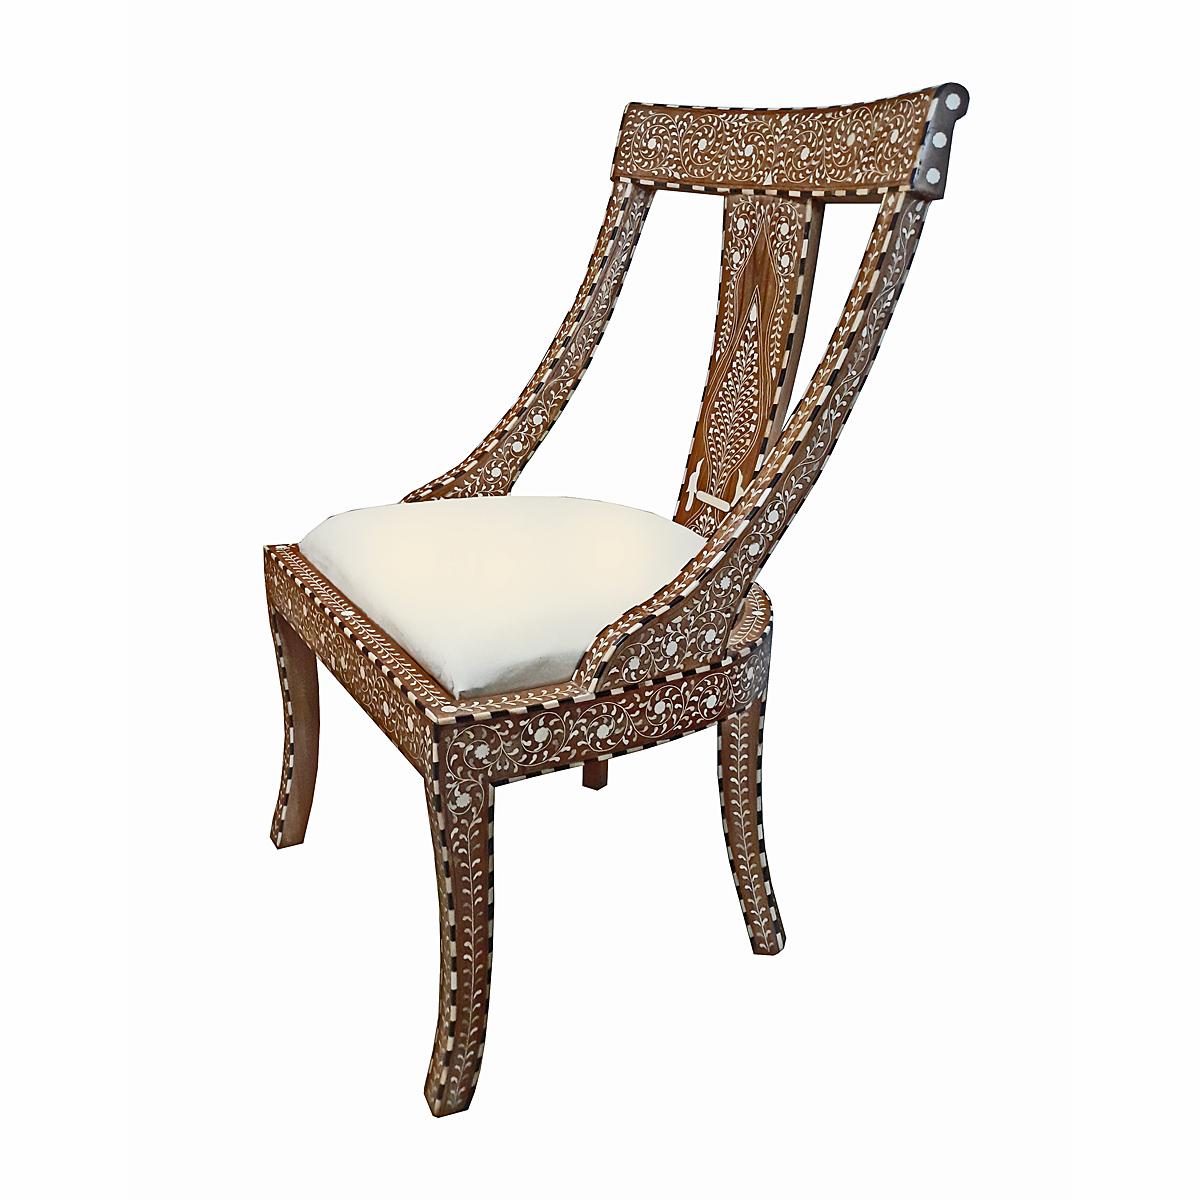 Anglo-Indian Bone-Inlaid Armless Chair with Cushion